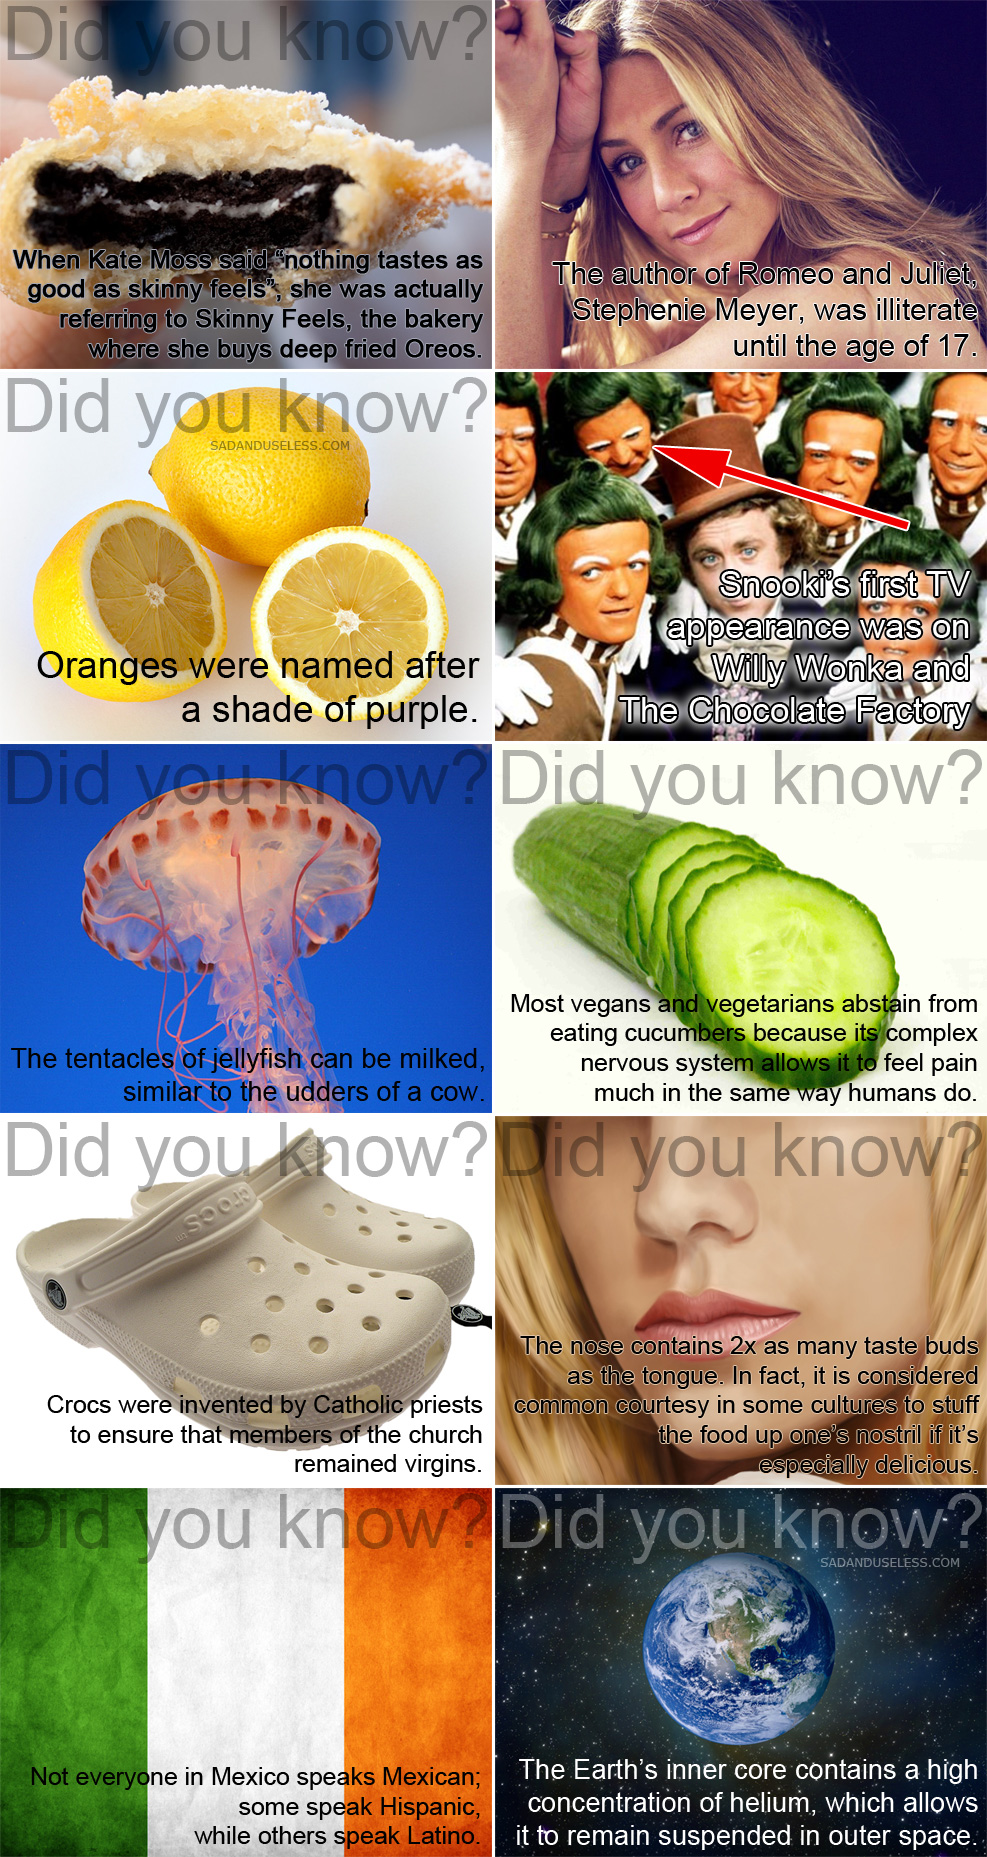 The more you know...